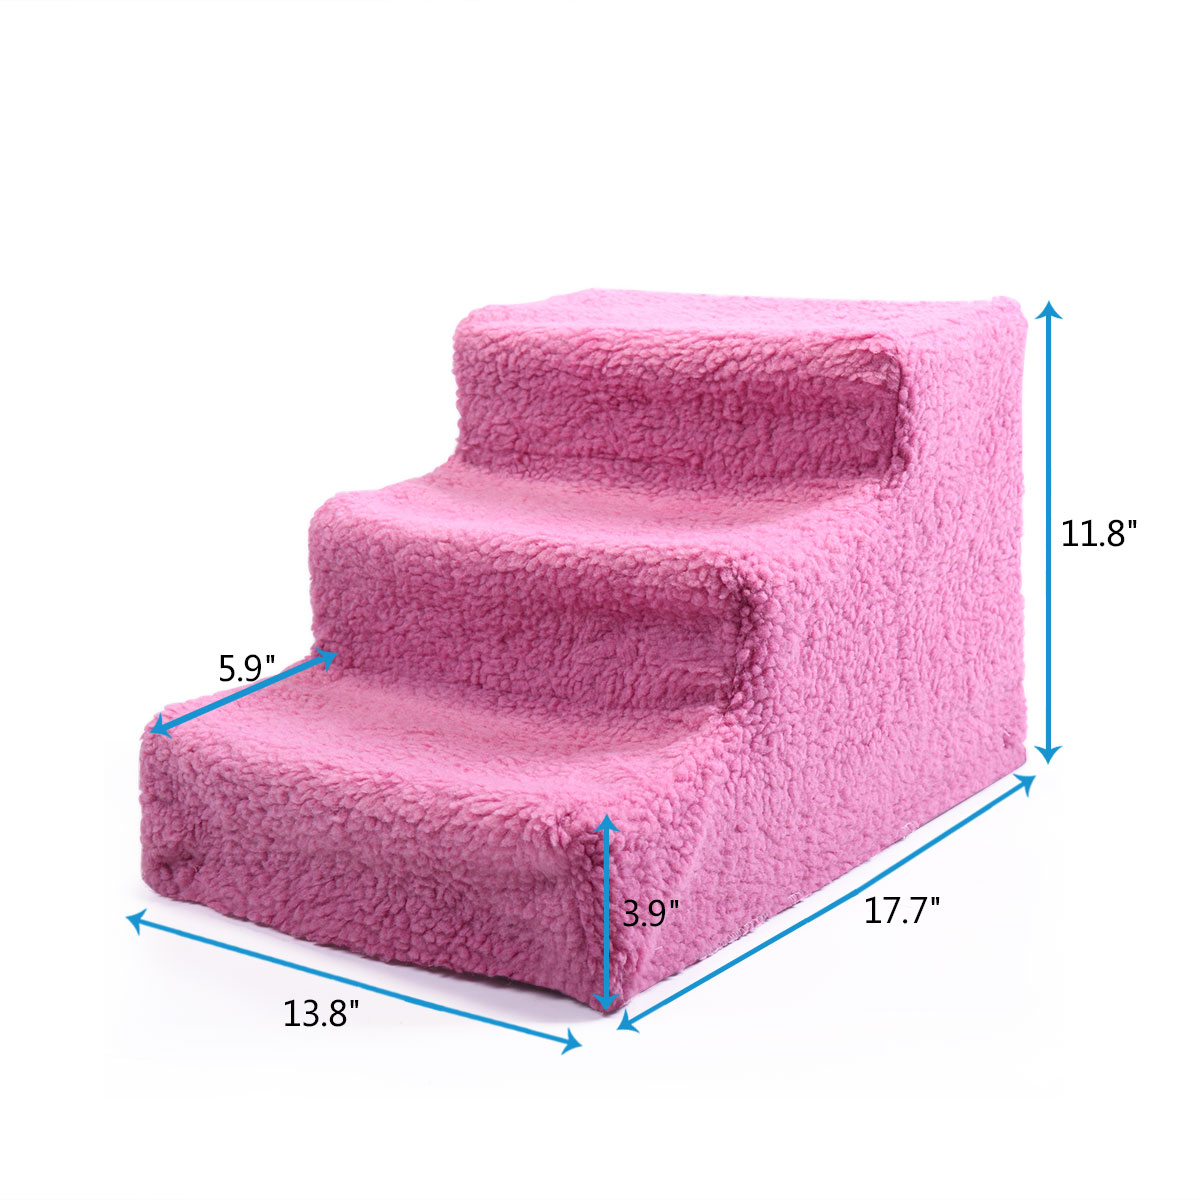 Coziwow Pet Stairs 3 Steps Indoor Dog Cat Steps Removable Washable Pets Ramp Ladder Pink - image 2 of 10